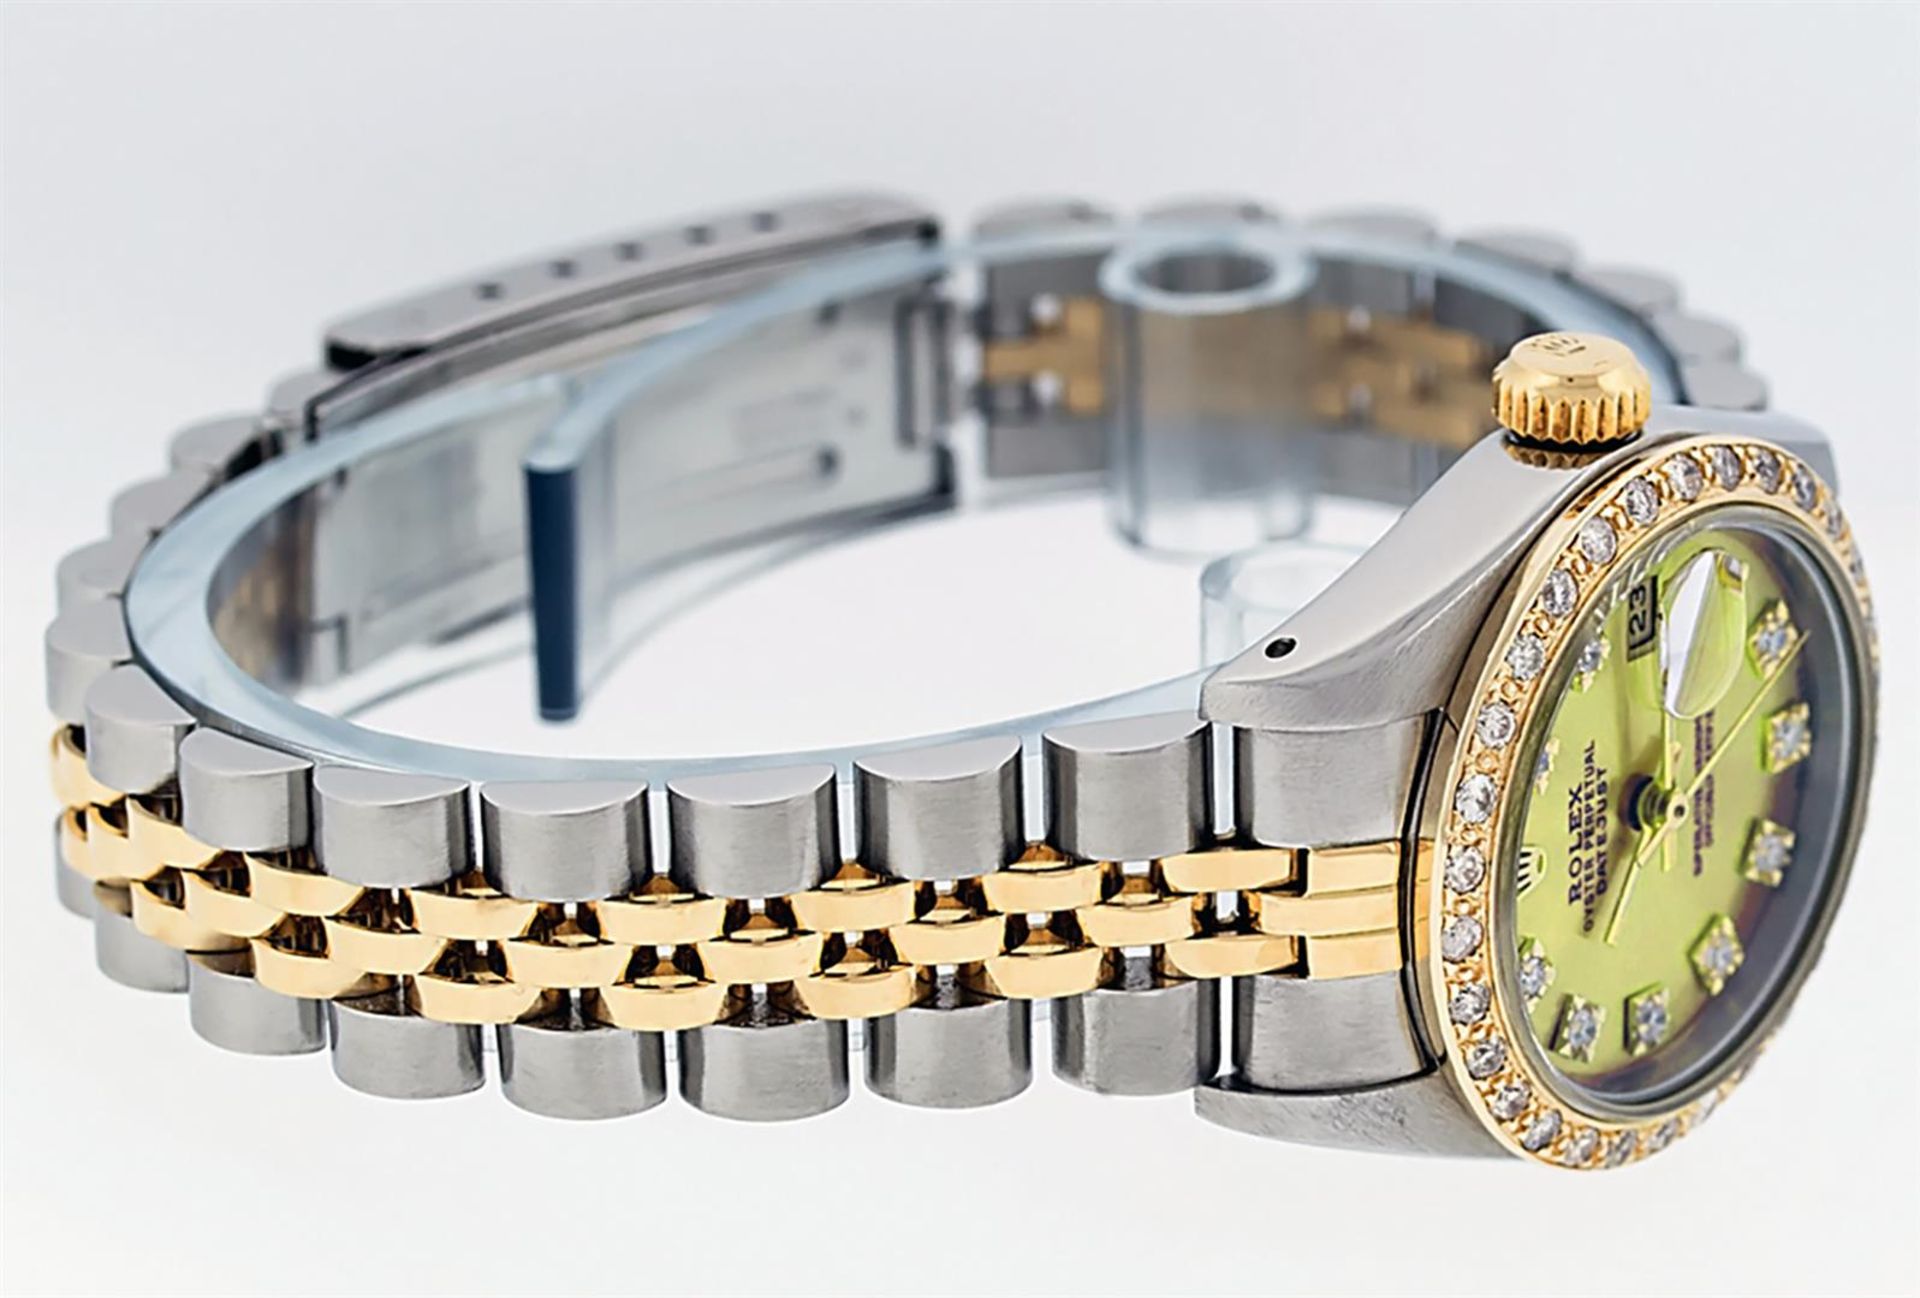 Rolex Ladies 2 Tone Yellow VS Diamond Oyster Perpetual Datejust Wristwatch - Image 3 of 9